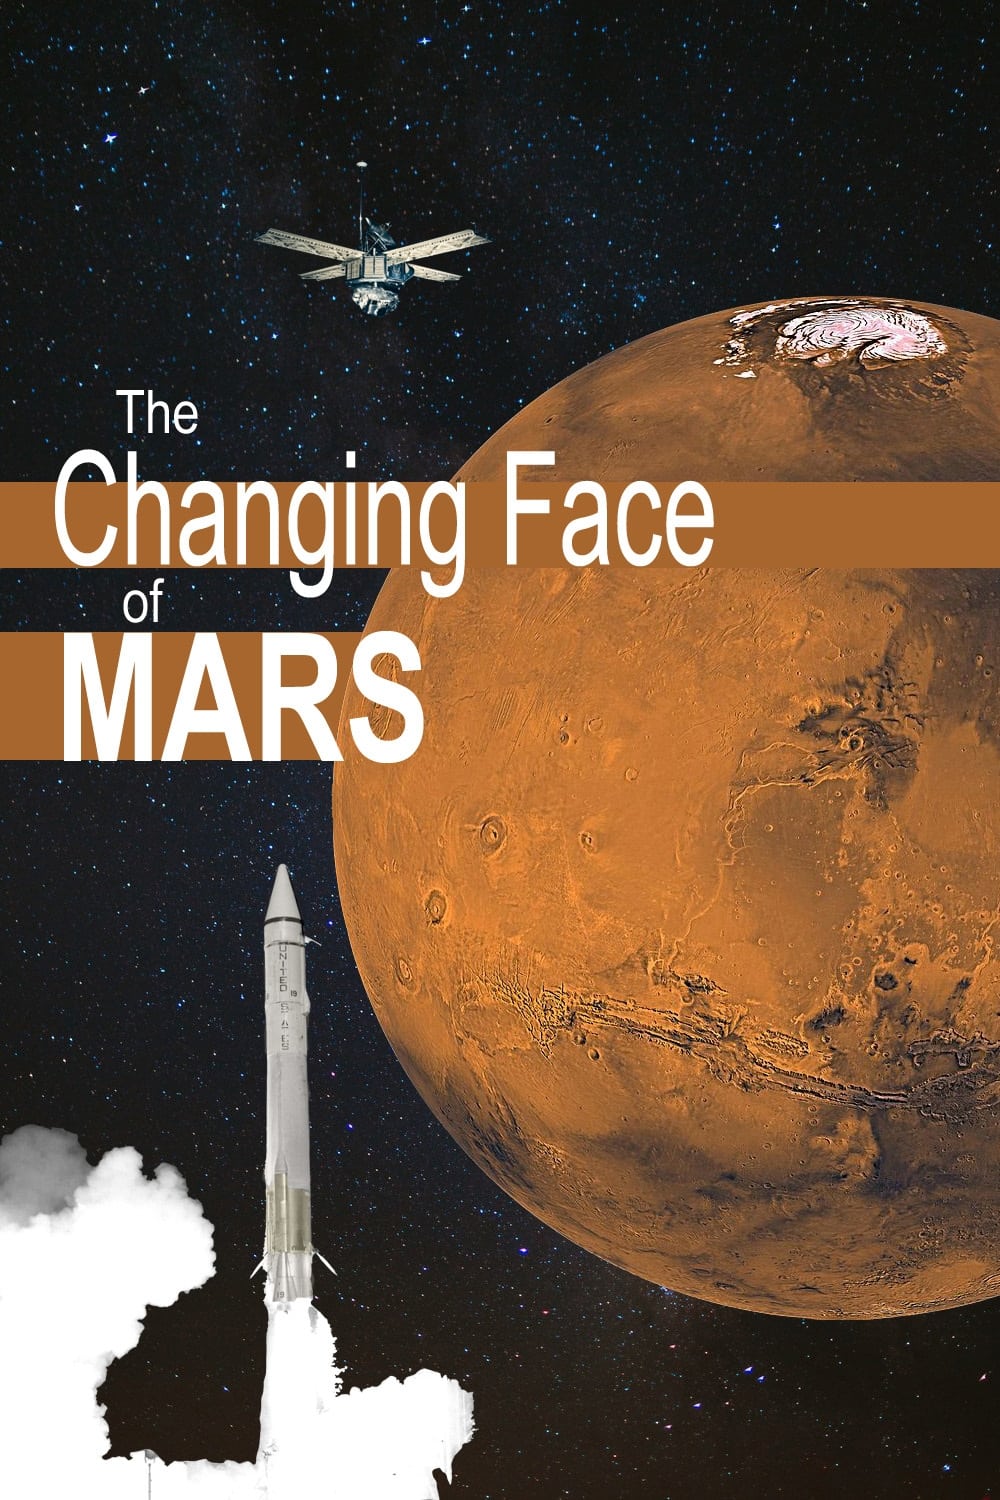 The Changing Face of Mars